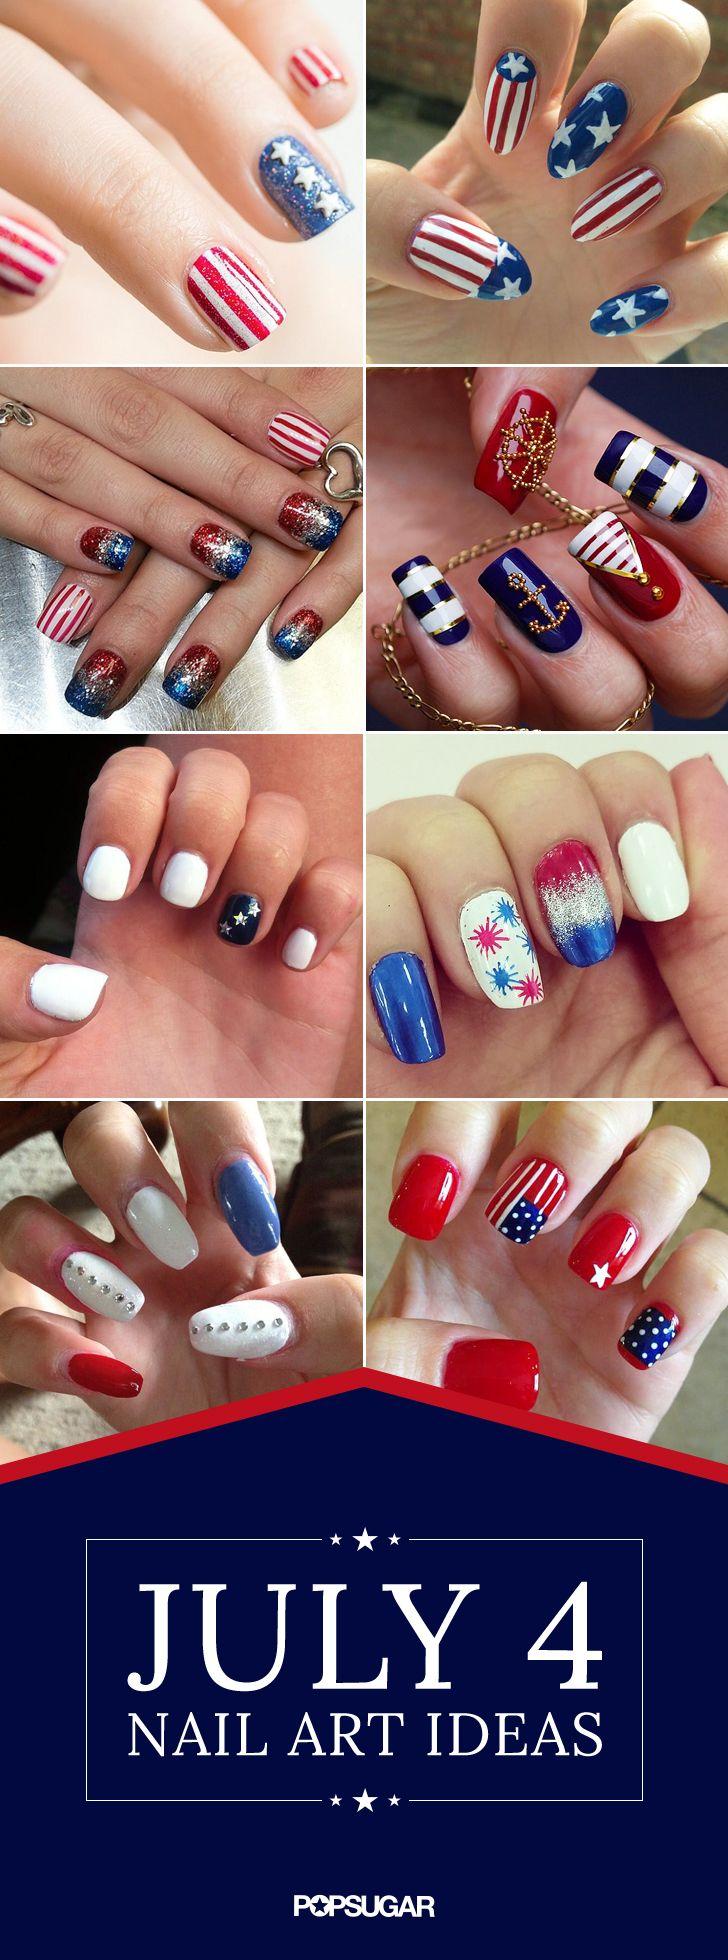 Wedding - Even More Inspiration For Your July 4 Nail Art